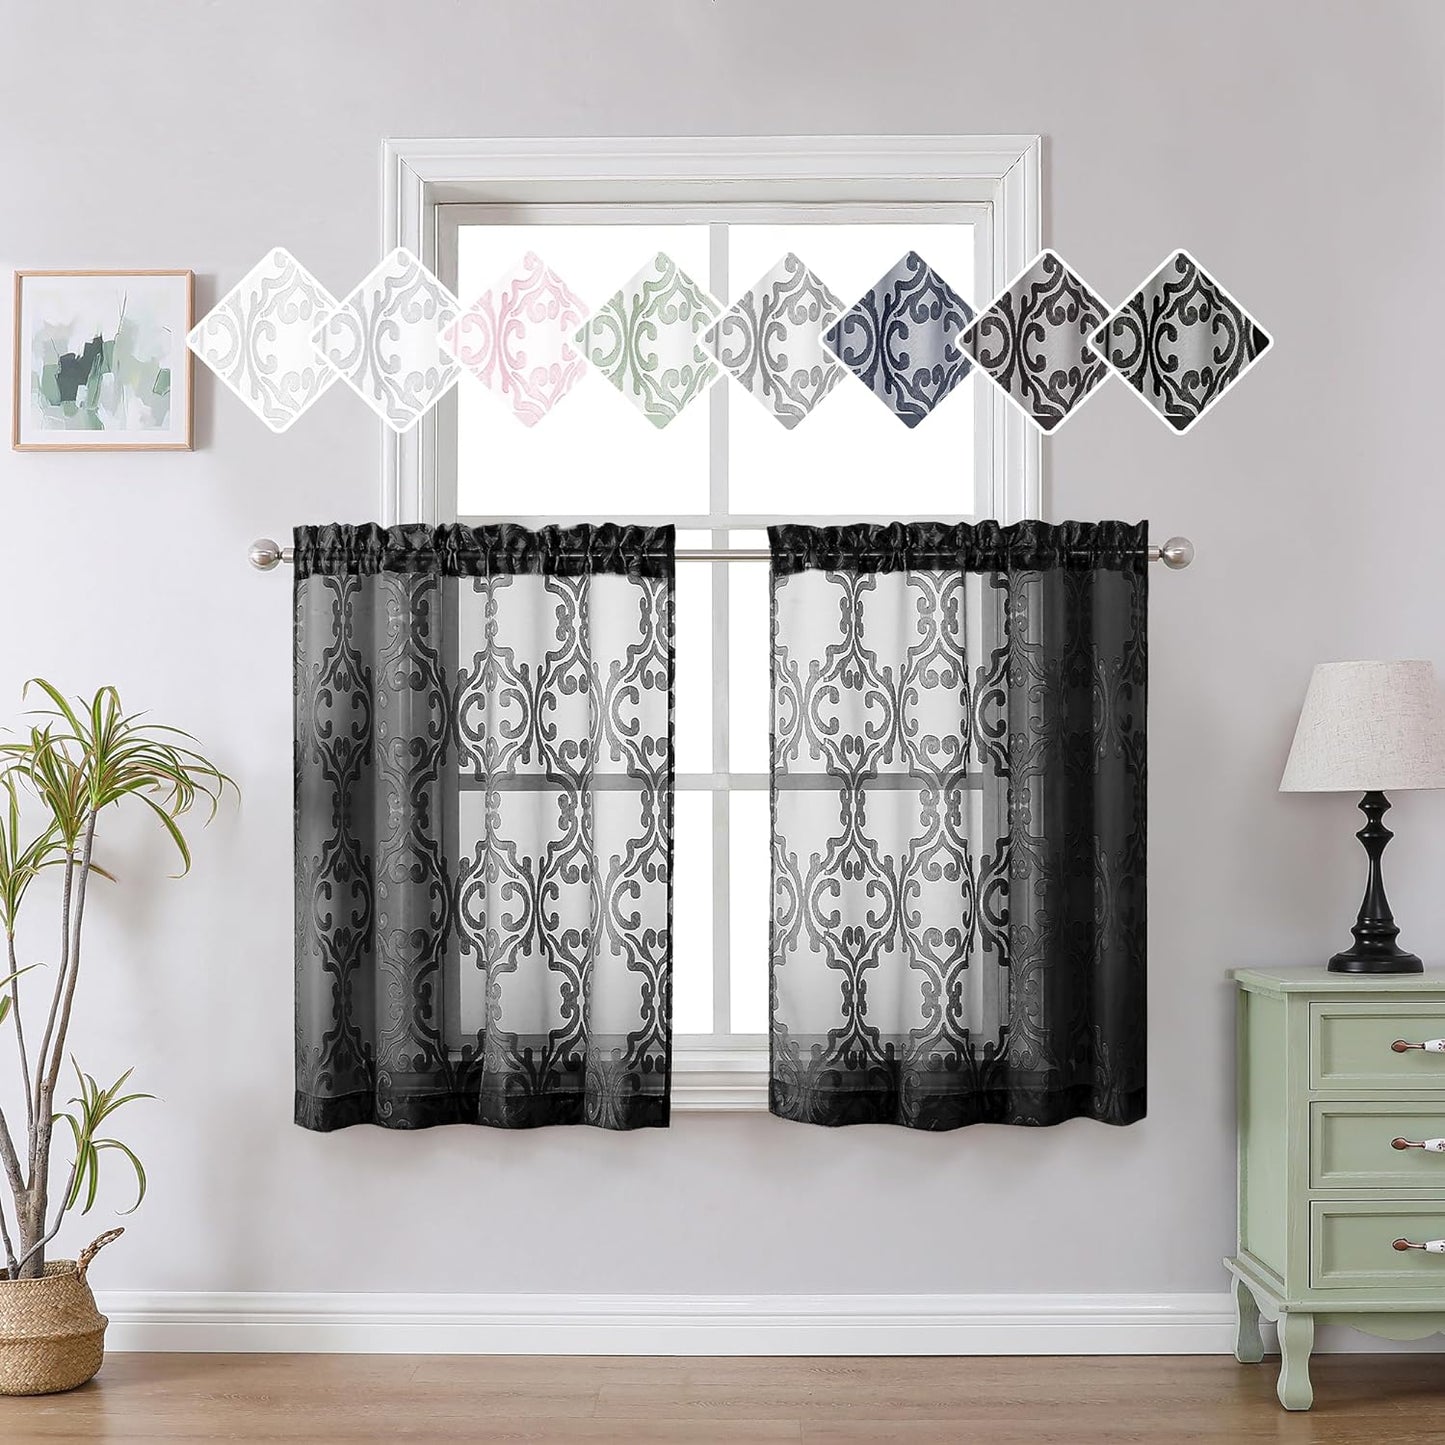 Aiyufeng Suri 2 Panels Sheer Sage Green Curtains 63 Inches Long, Light & Airy Privacy Textured Sheer Drapes, Dual Rod Pocket Voile Clipped Floral Luxury Panels for Bedroom Living Room, 42 X 63 Inch  Aiyufeng Black 2X42X36" 